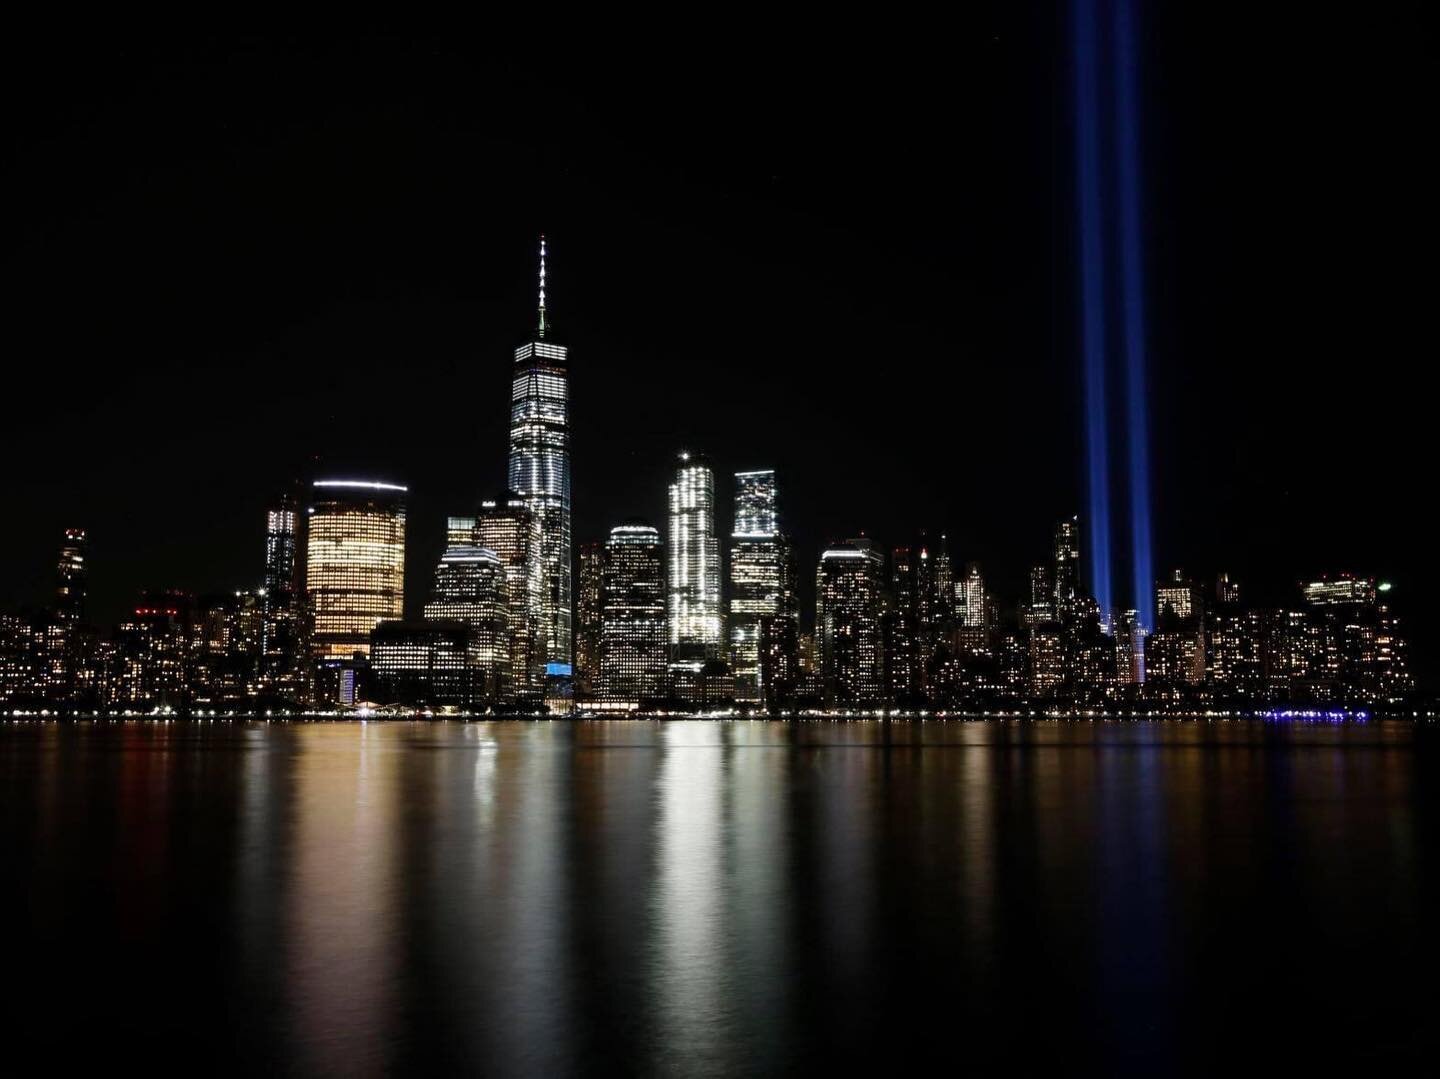 Today, we remember 9/11 and the precious lives we have lost. We remember that after the first tower fell, the music in the plaza continued to play. We remember that even in our most solemn hour, the arts lived on, and the lives of those lost remain b